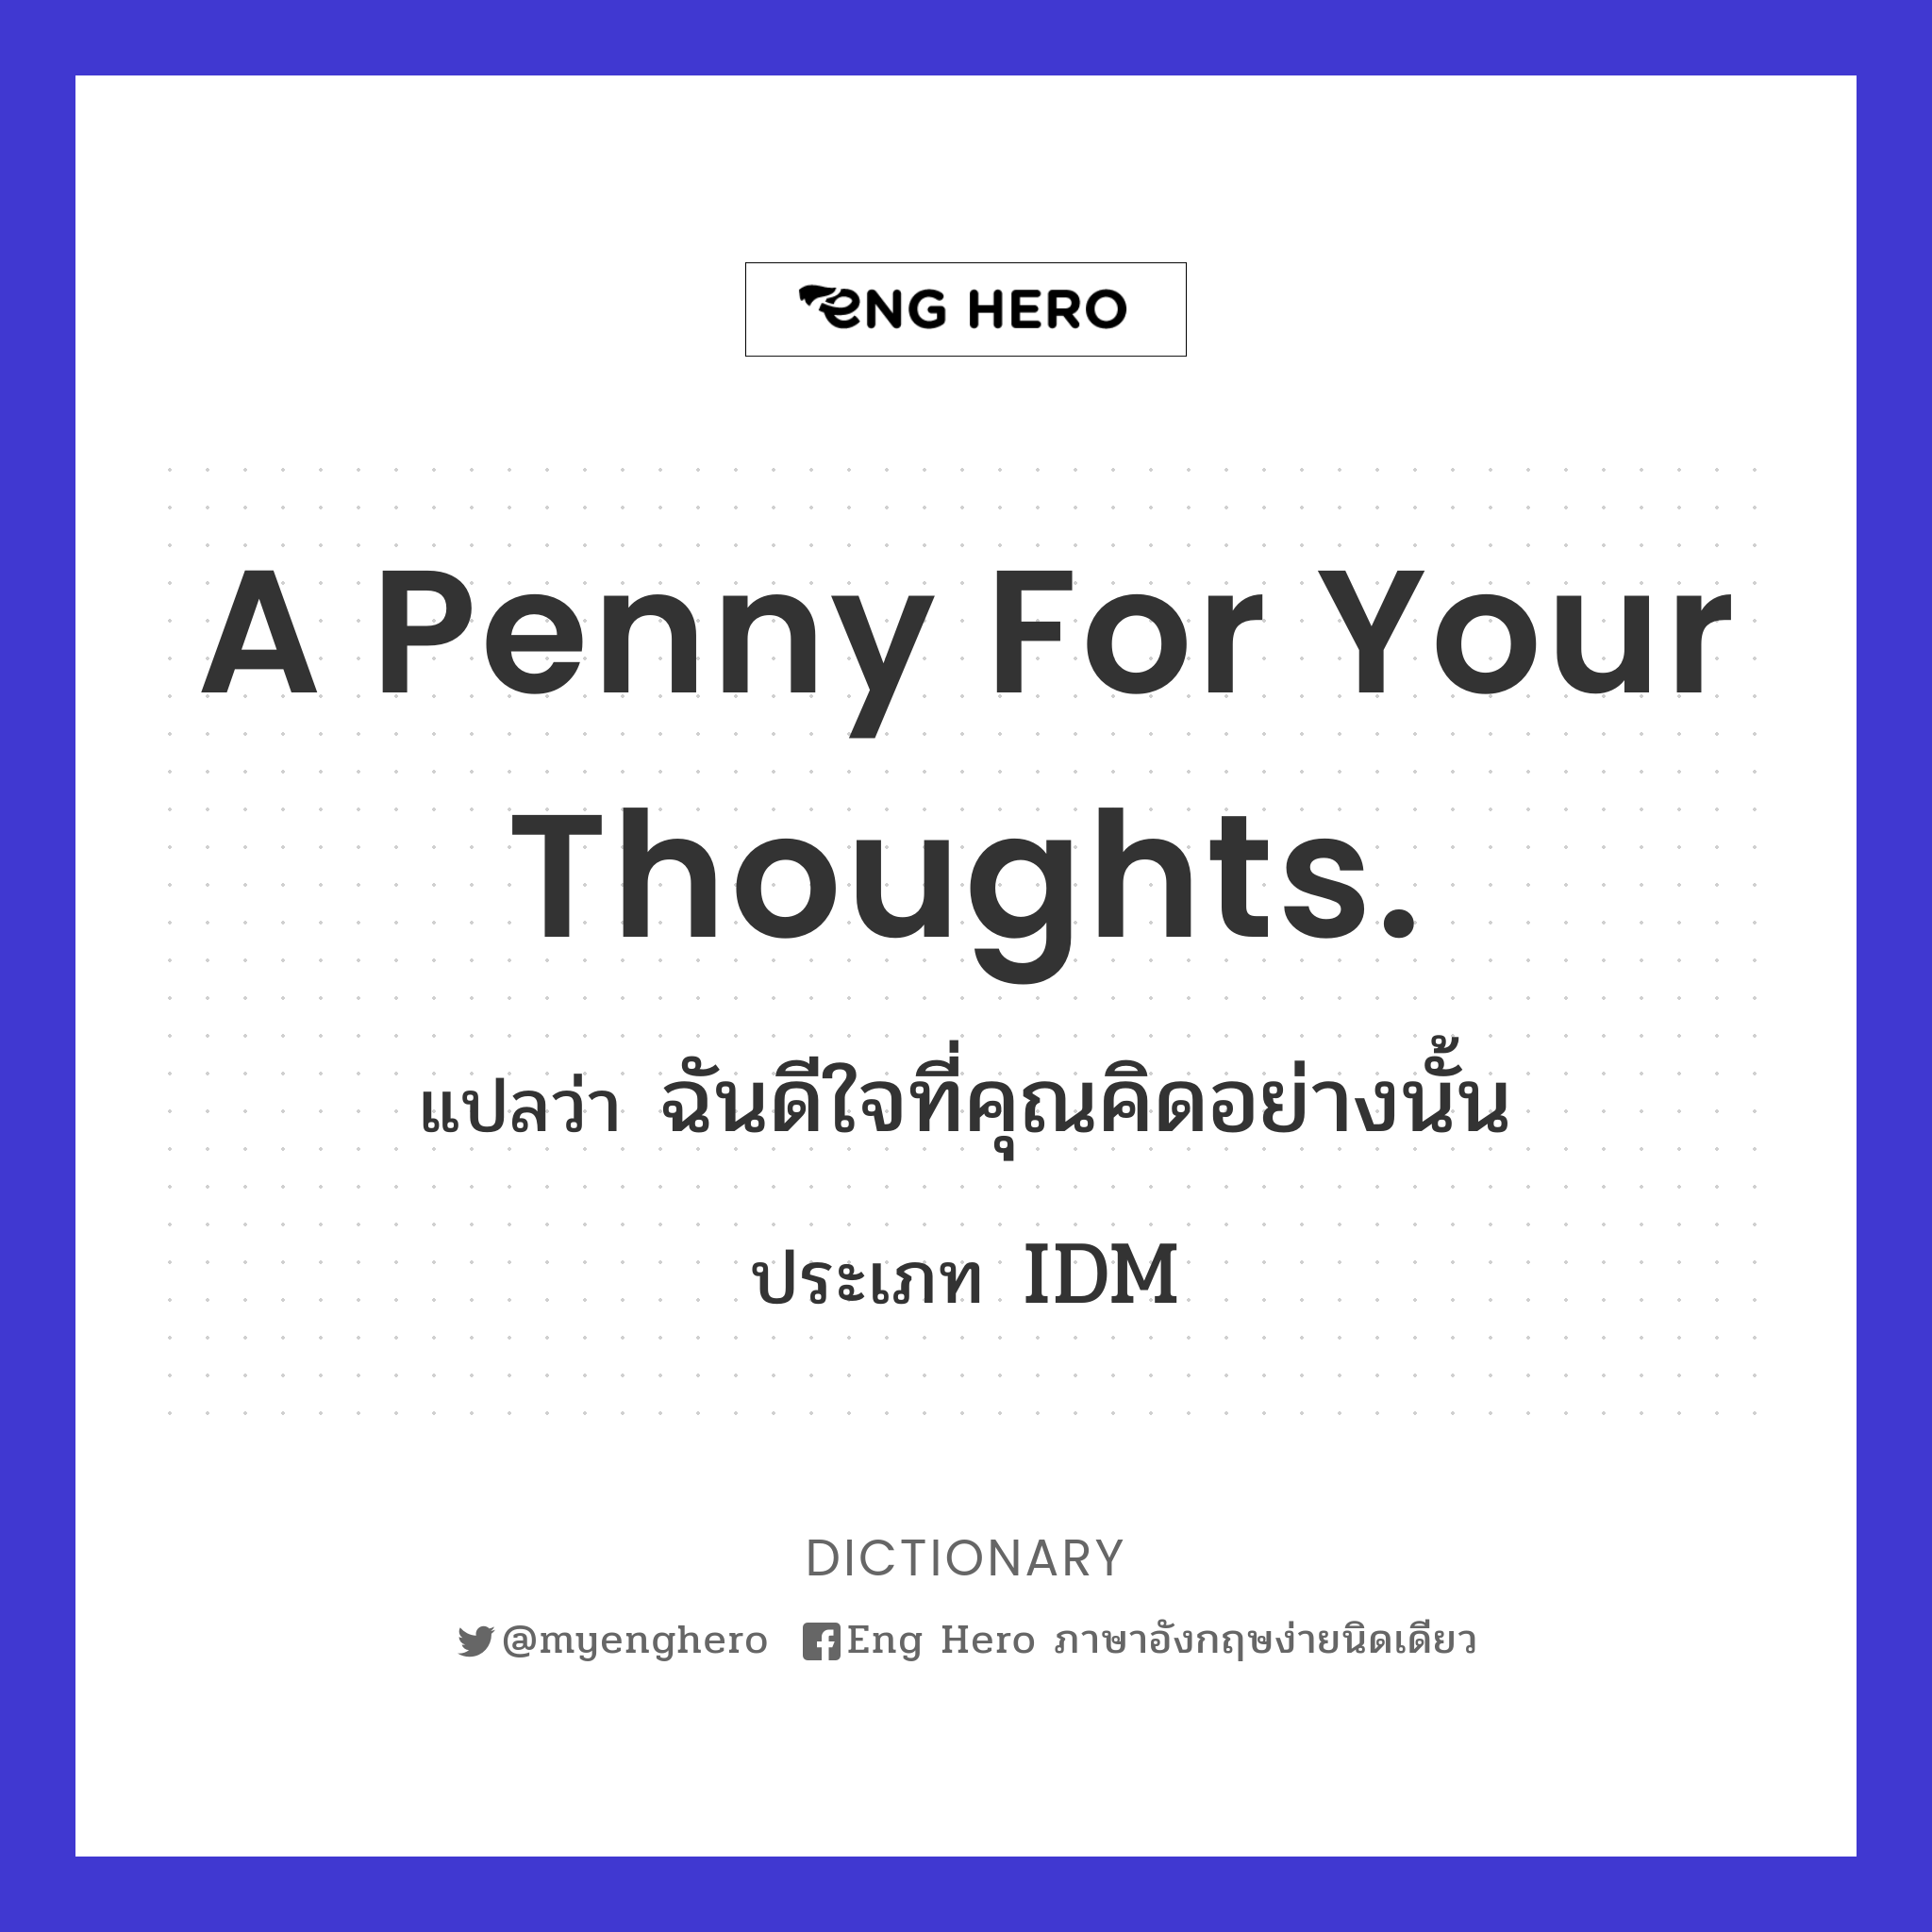 A penny for your thoughts.